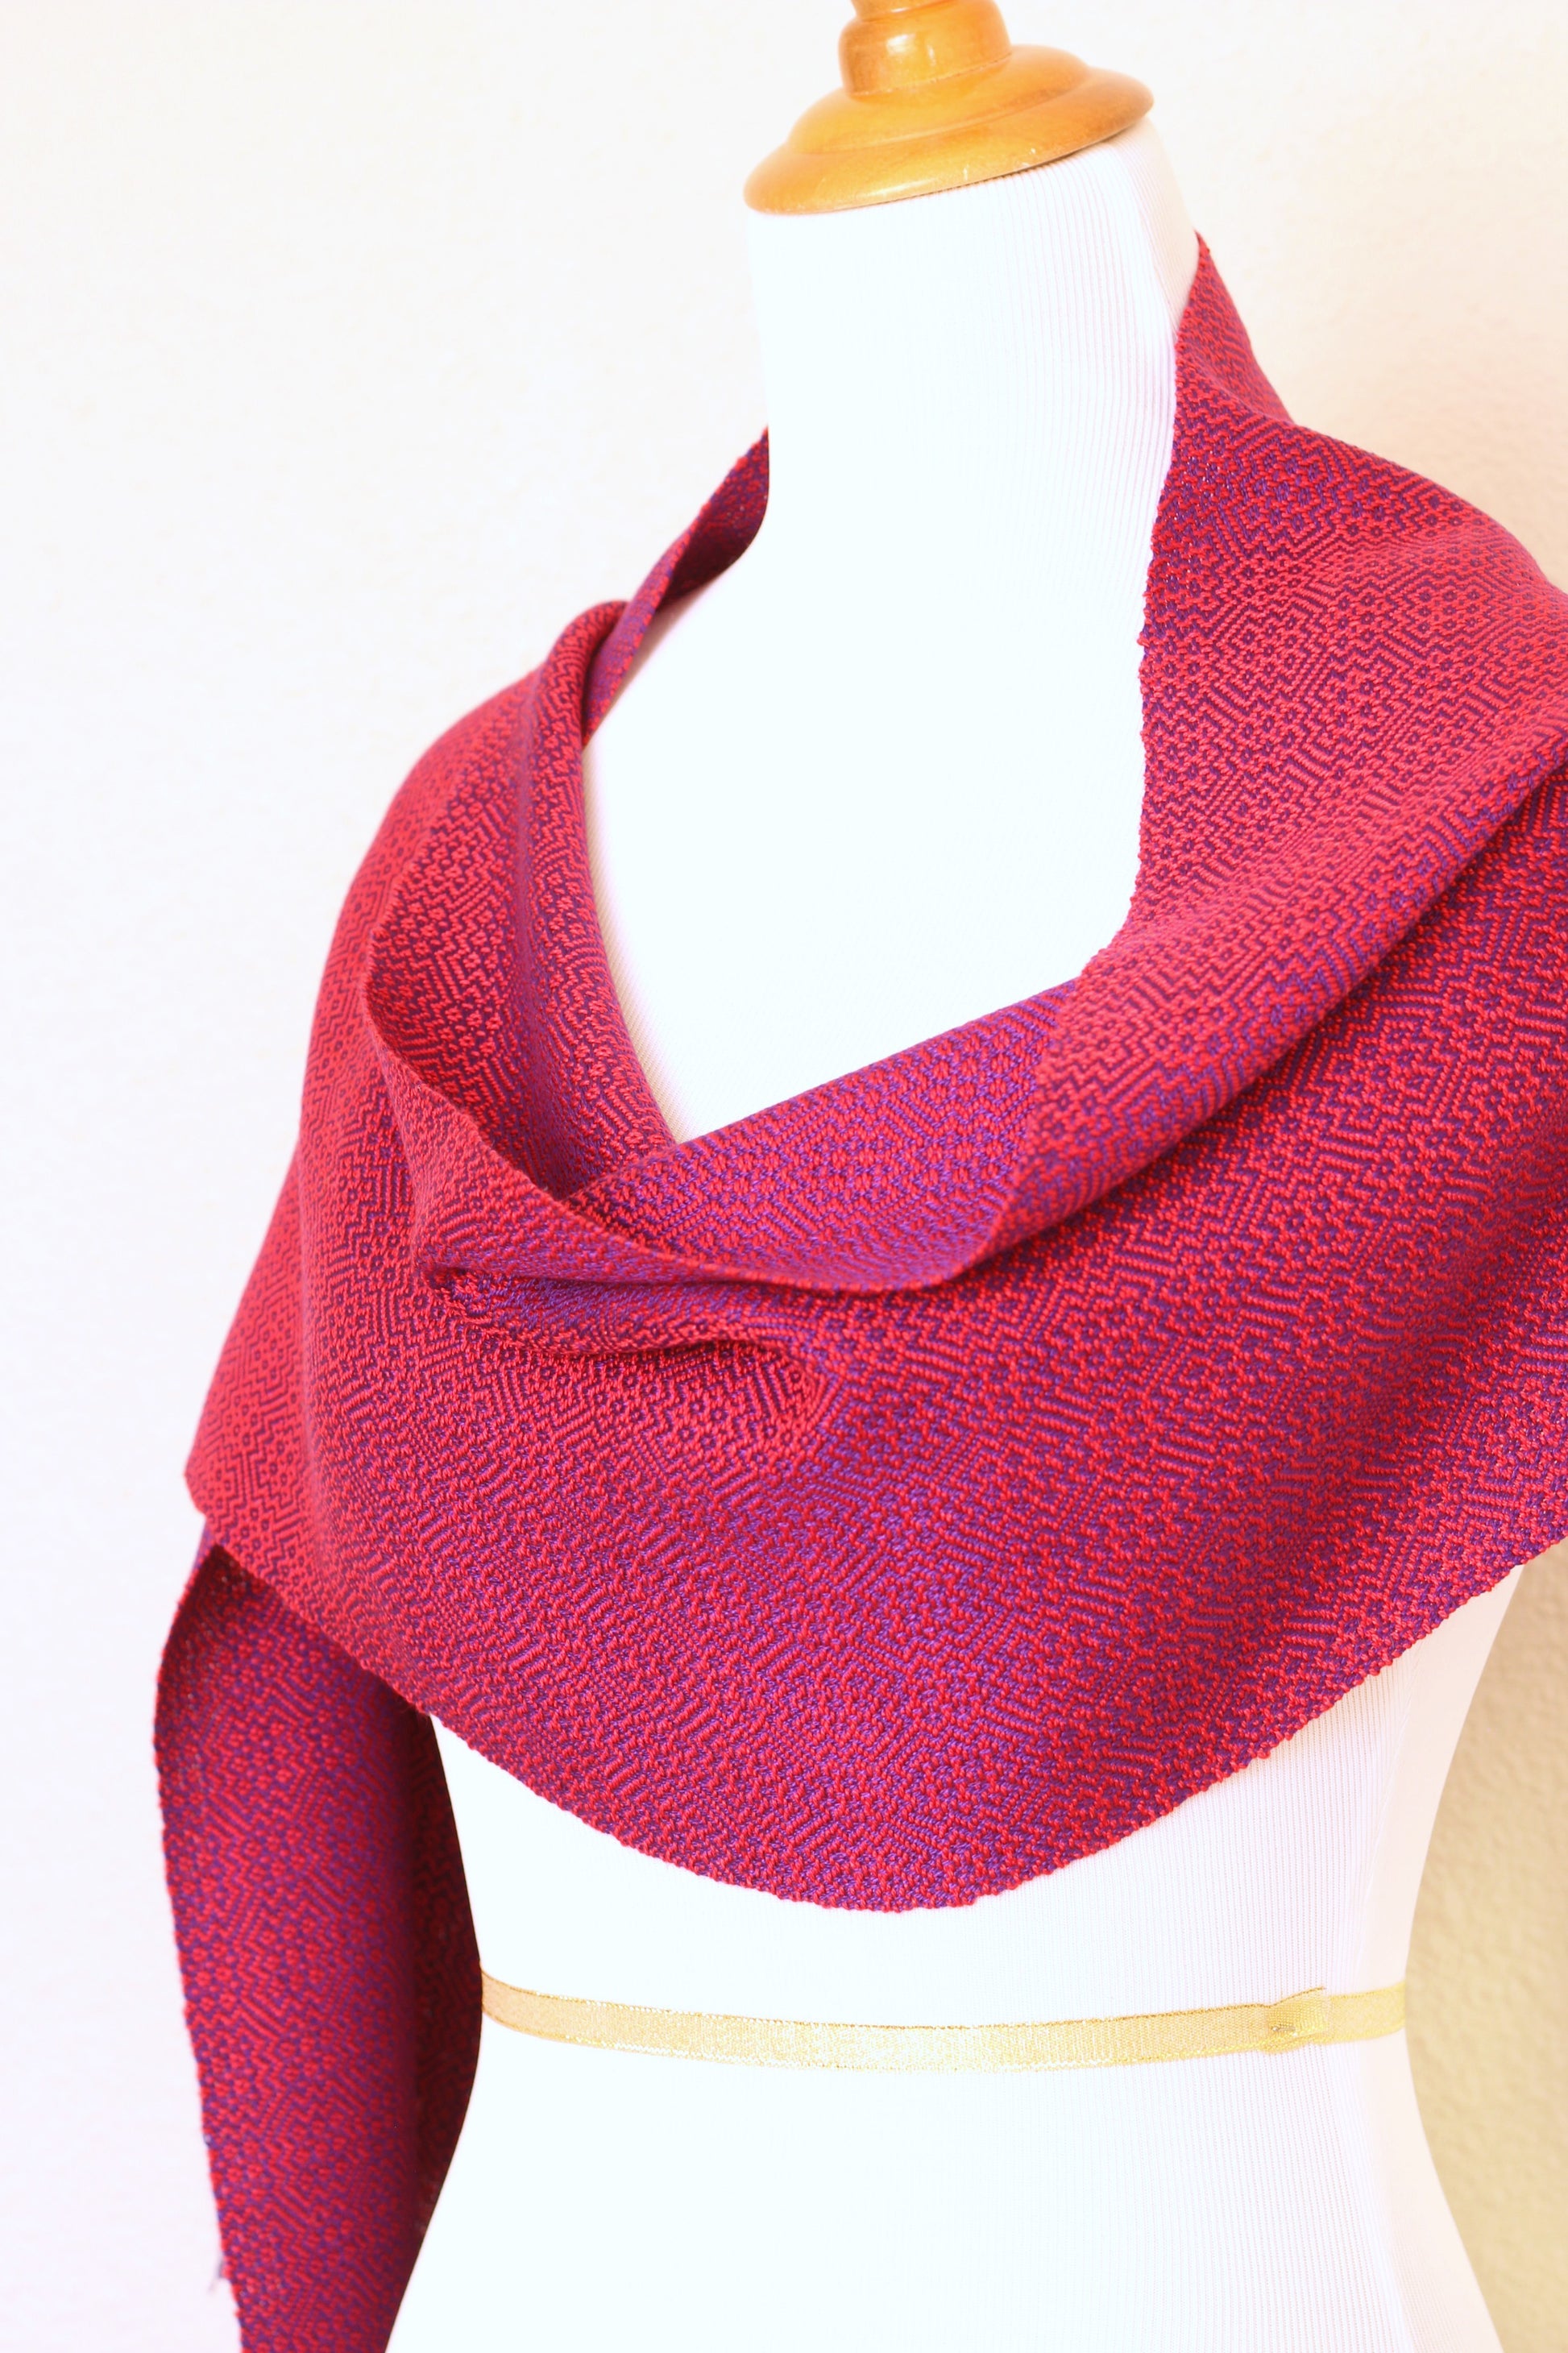 Woven scarf in red and purple color, eucalyptus scarf with fringe